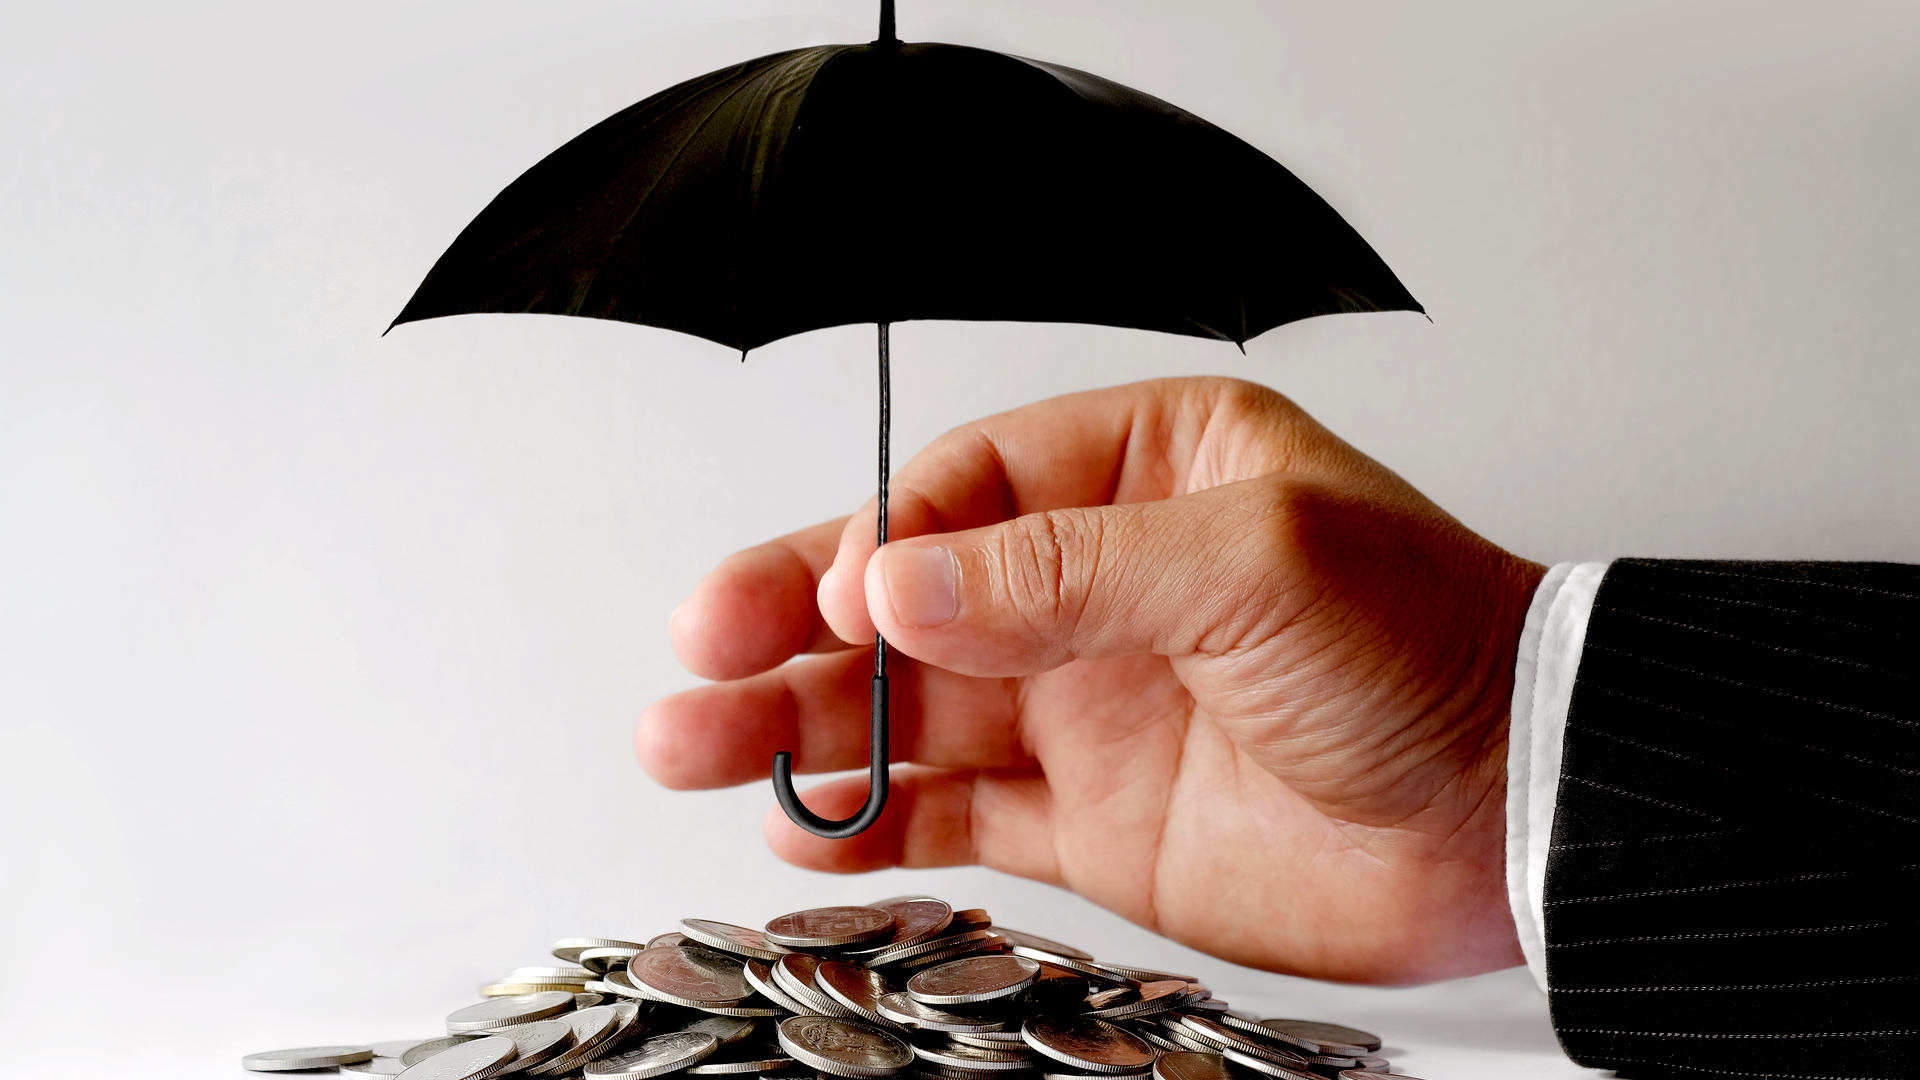 An image of a hand holding a small black umbrella. Underneath the umbrella there is a pile of coins. Income protection insurance for expats